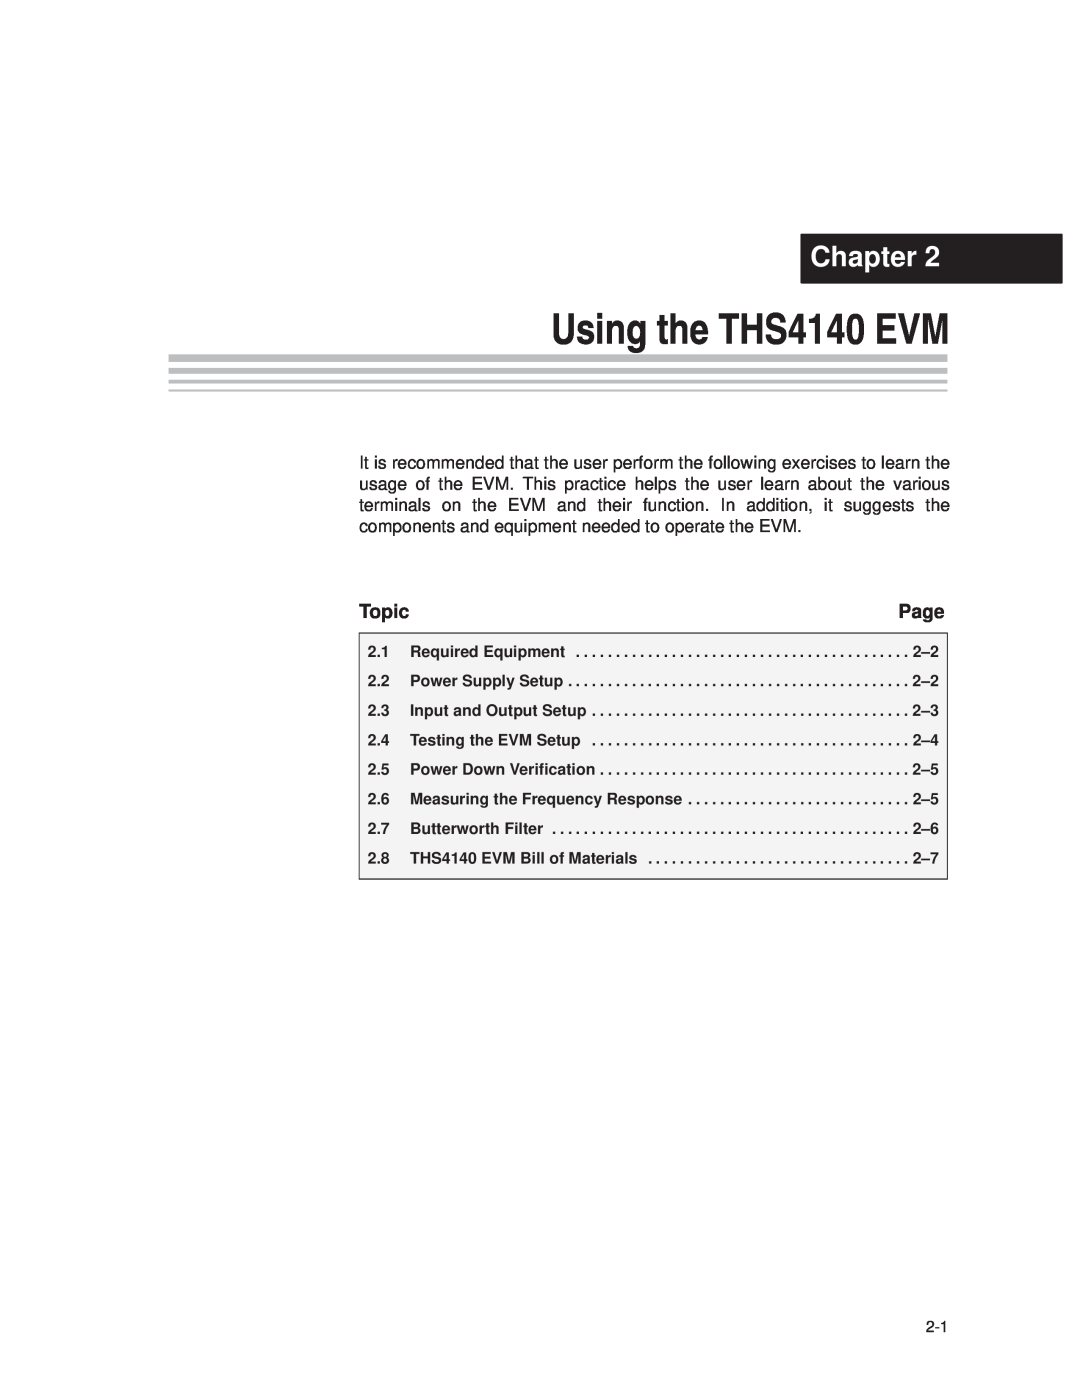 Texas Instruments SLOU106 manual Using the THS4140 EVM, Chapter, Page, Topic 